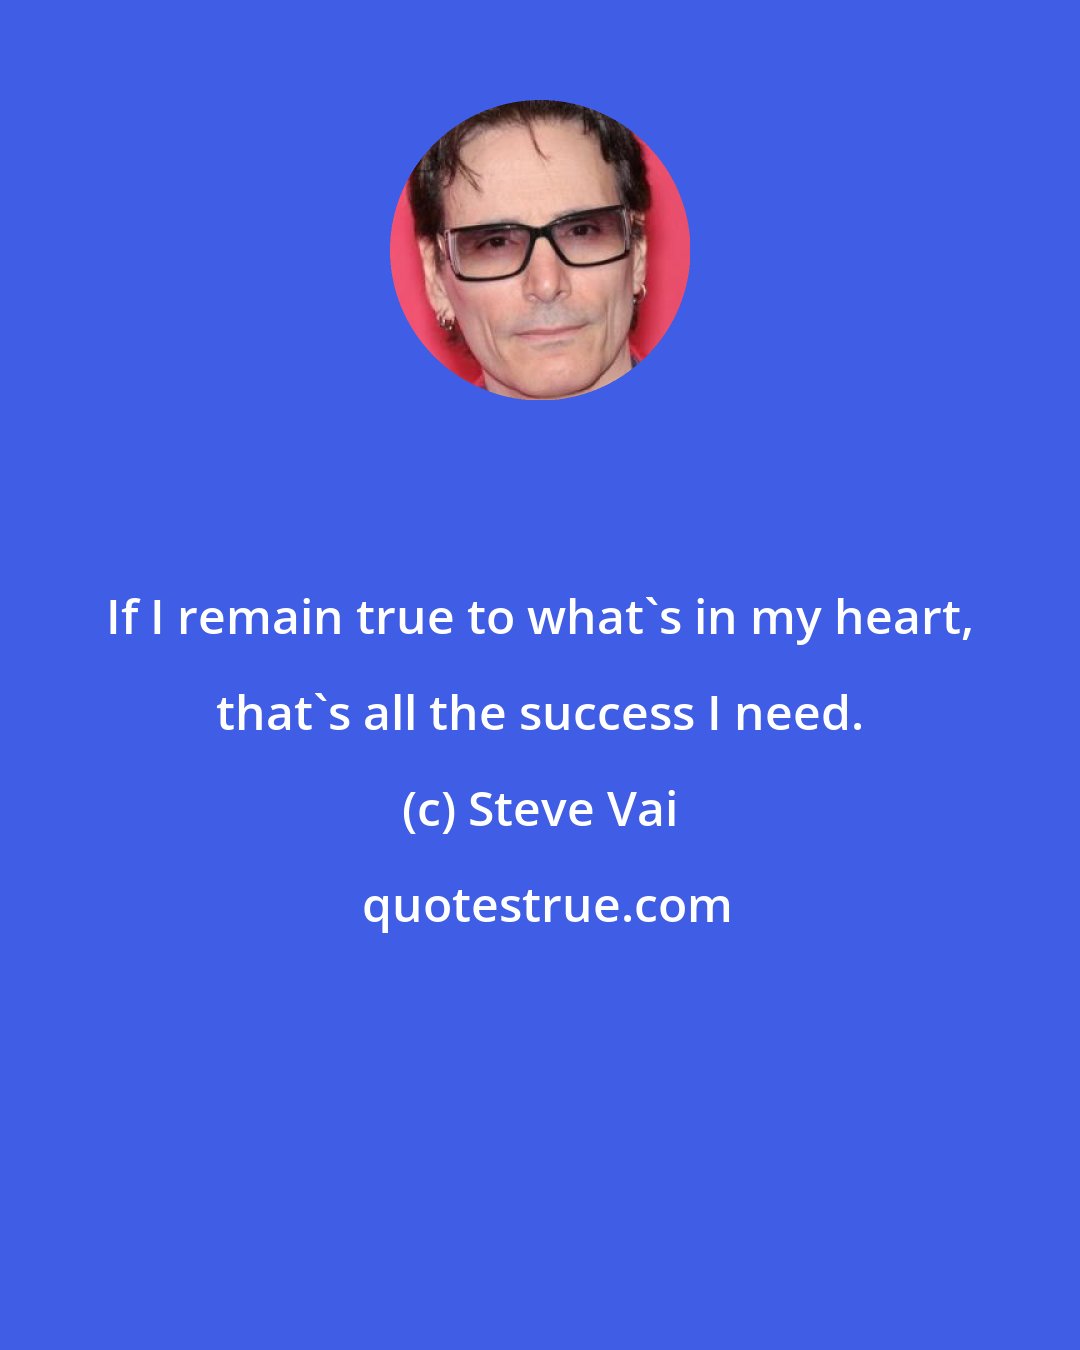 Steve Vai: If I remain true to what's in my heart, that's all the success I need.